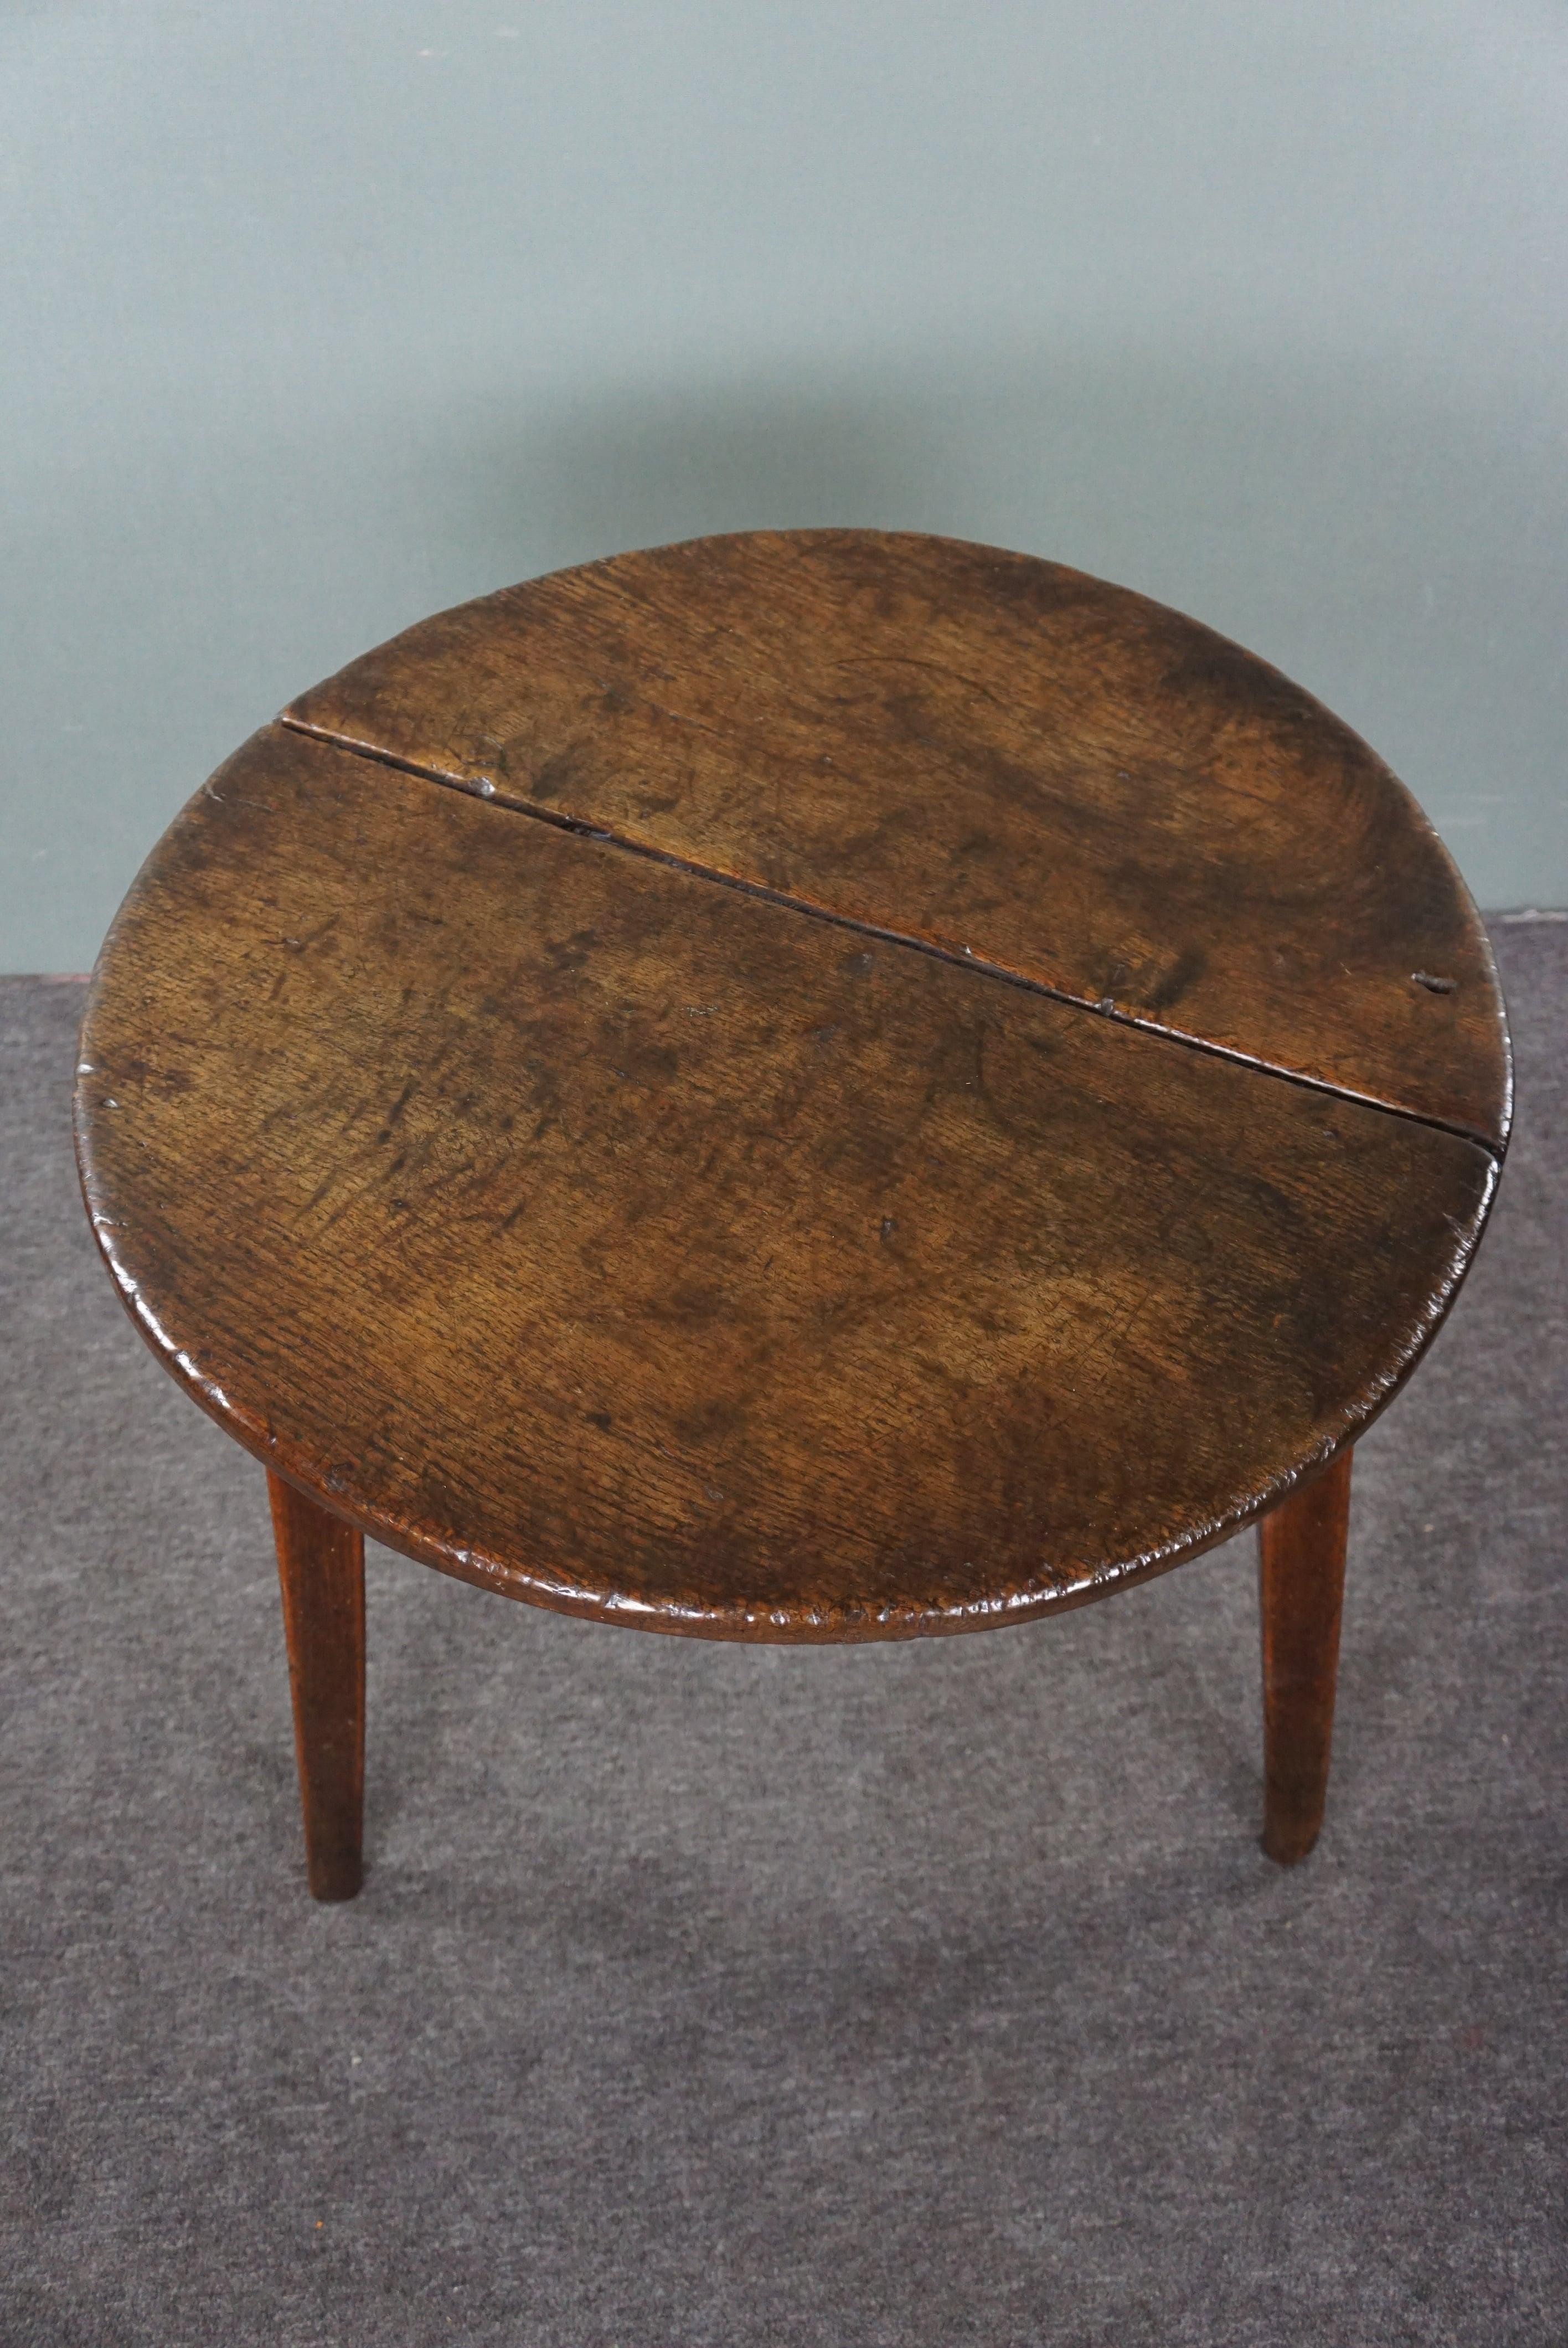 Wood Antique 18th-century English cricket table/3-leg table For Sale